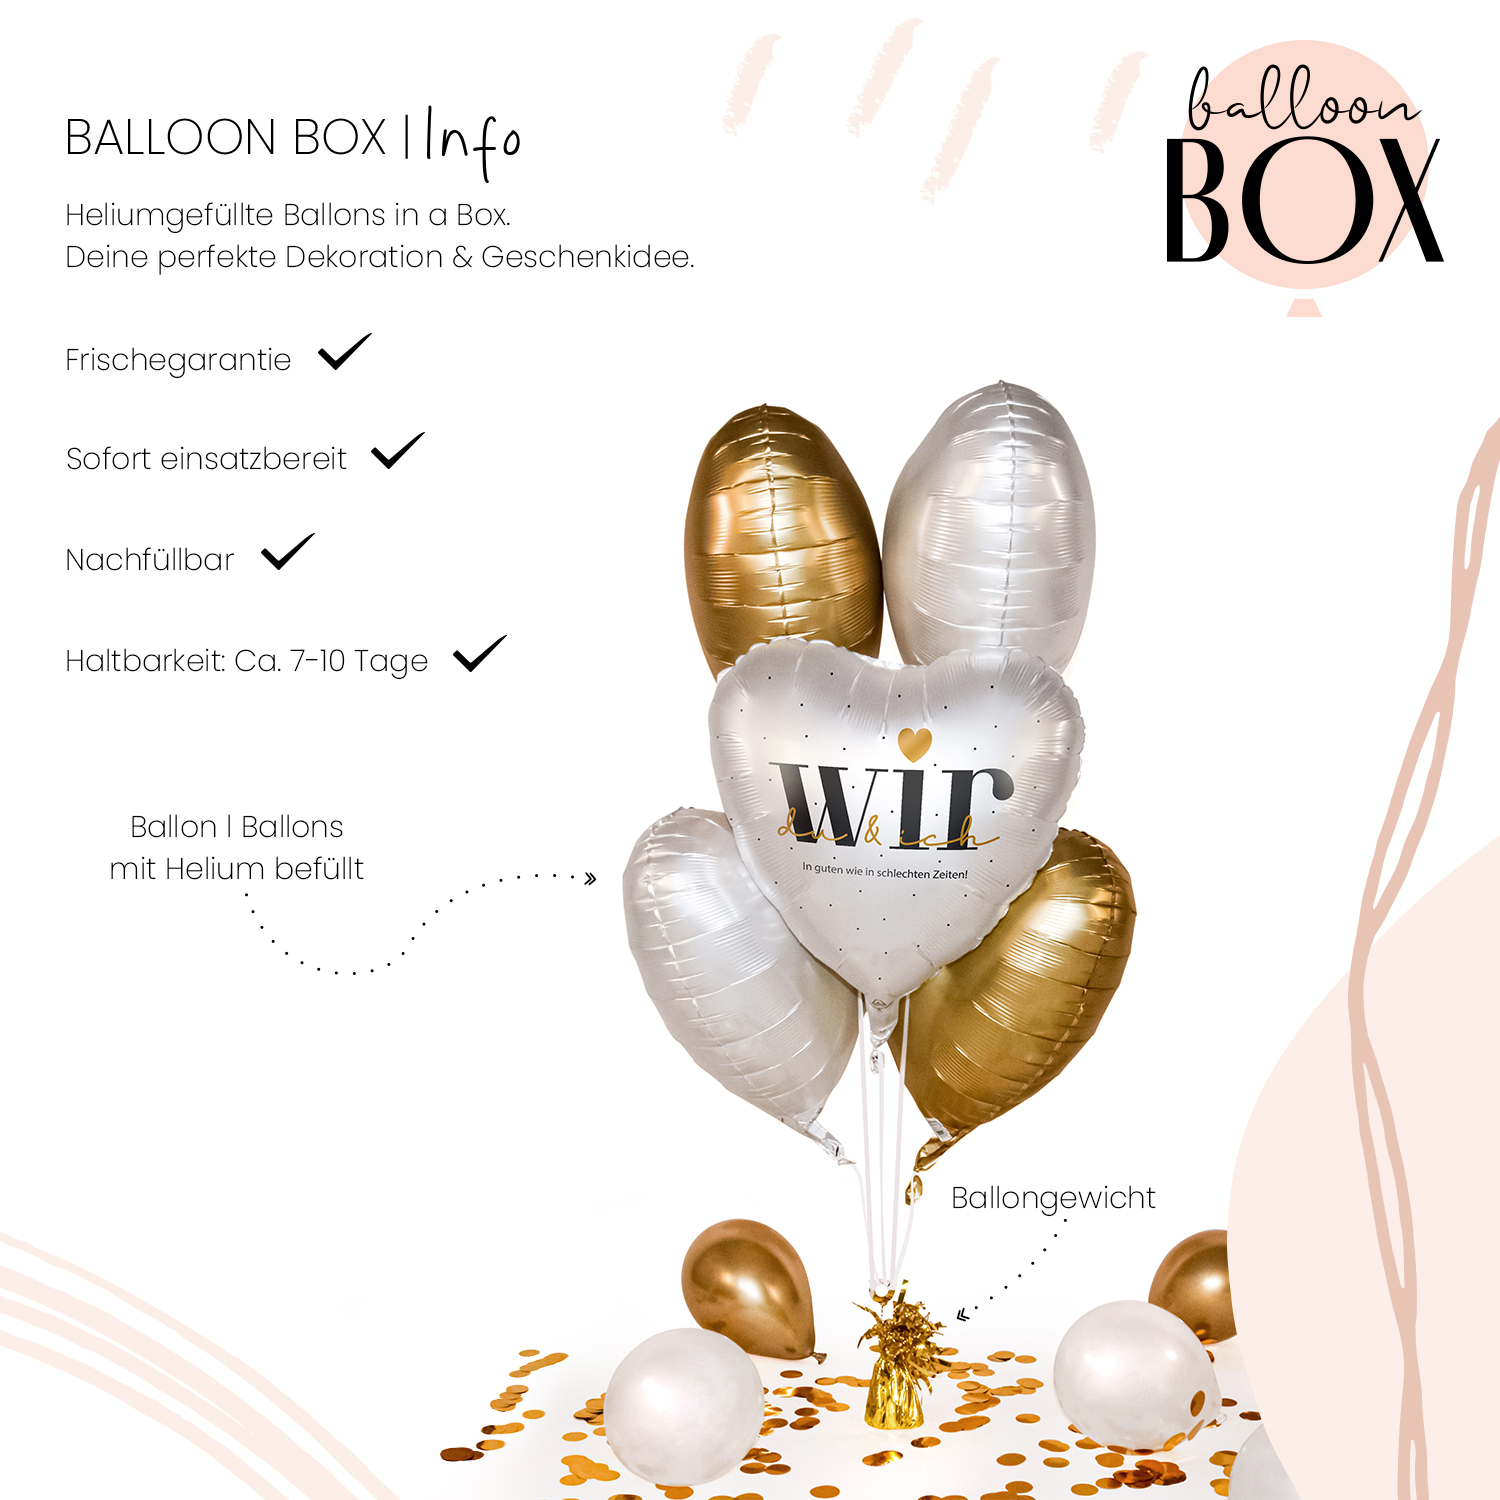 Heliumballon in a Box - WIR Promise